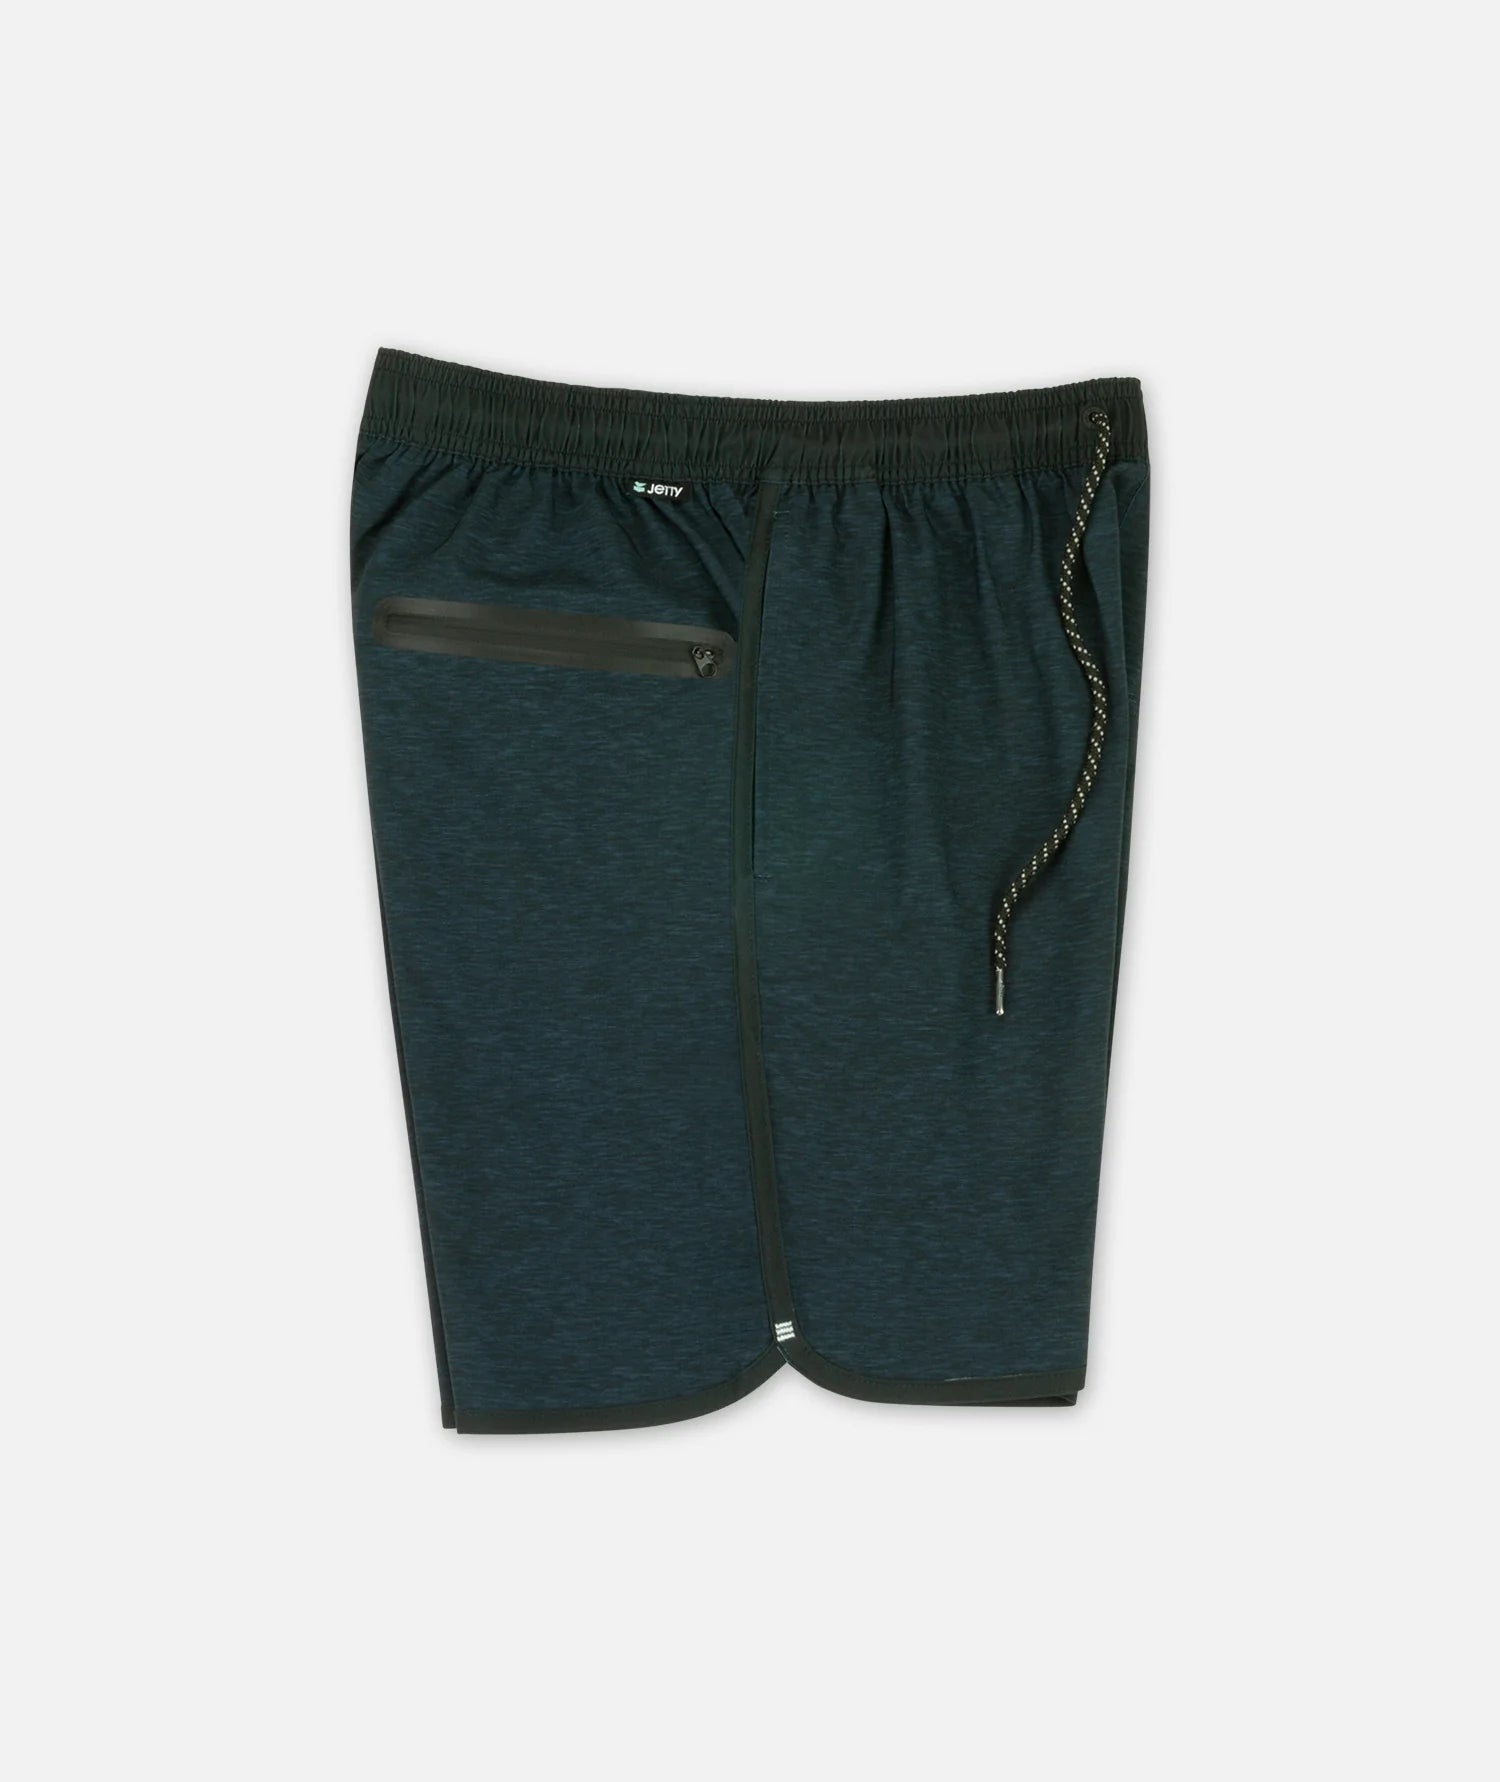 Jetty Session Board Shorts Carbon